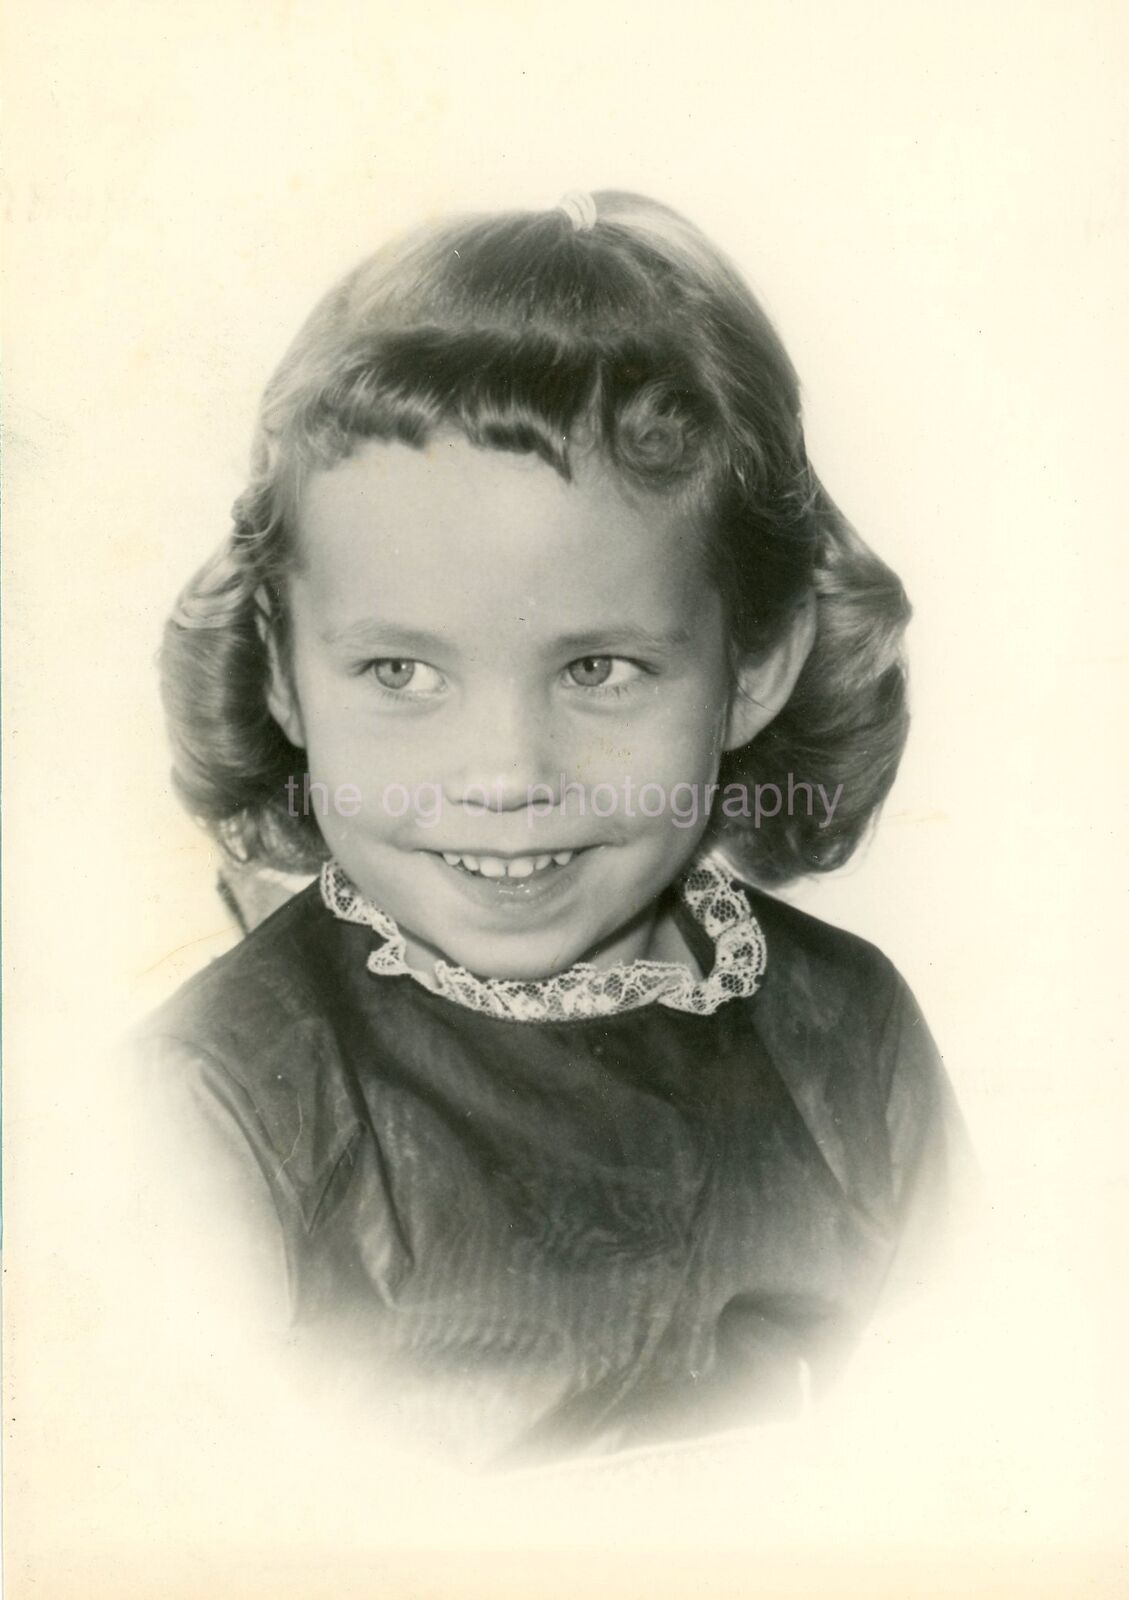 5x7 FOUND PHOTO YOUNG GIRL1940\'s1950\'s BLACK AND WHITE Original PORTRAIT 26 41 M